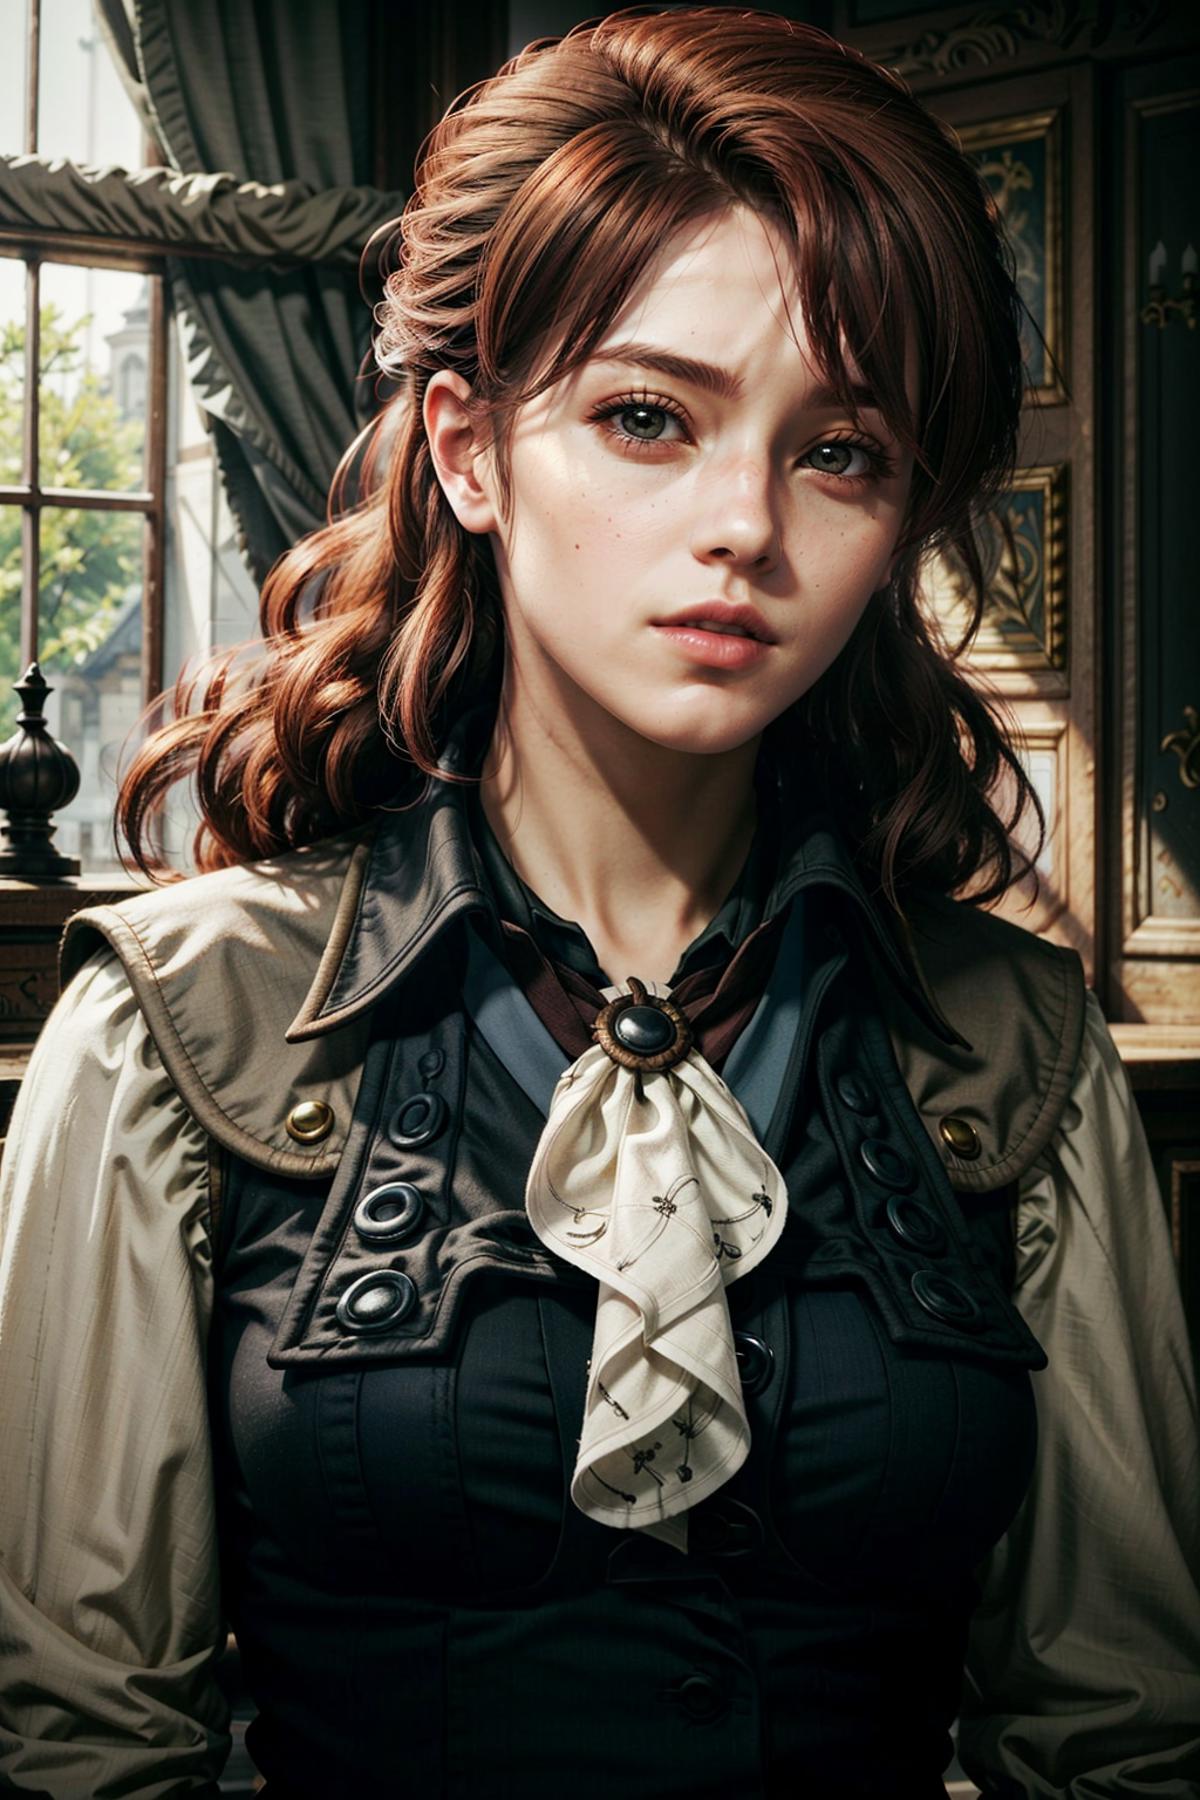 Elise from Assassin's Creed Unity image by BloodRedKittie